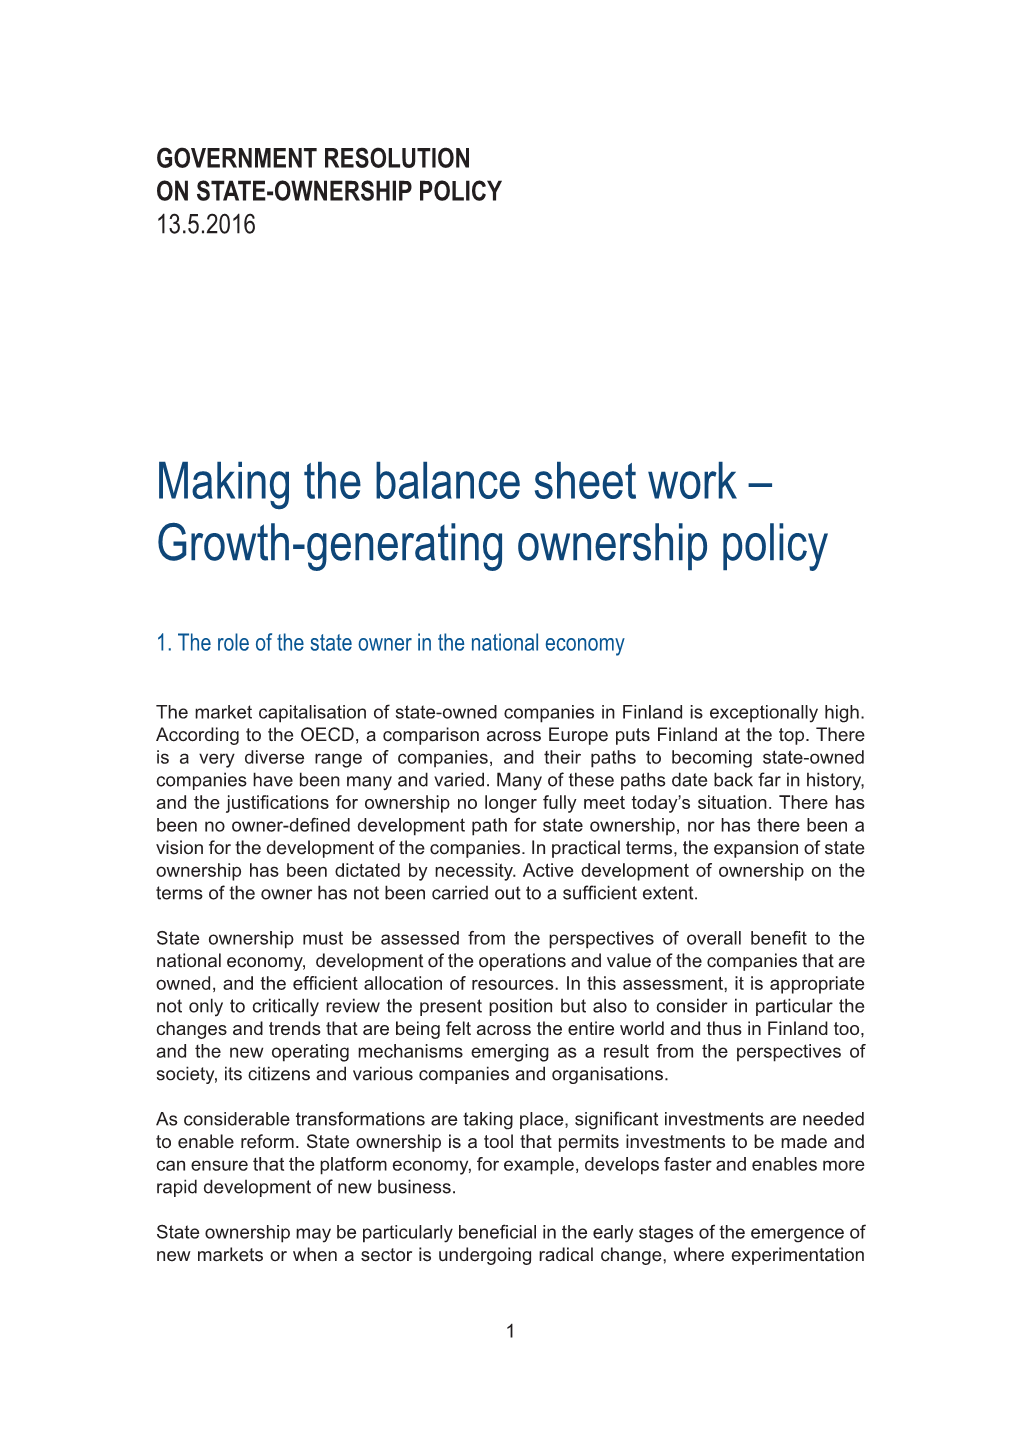 Making the Balance Sheet Work – Growth-Generating Ownership Policy